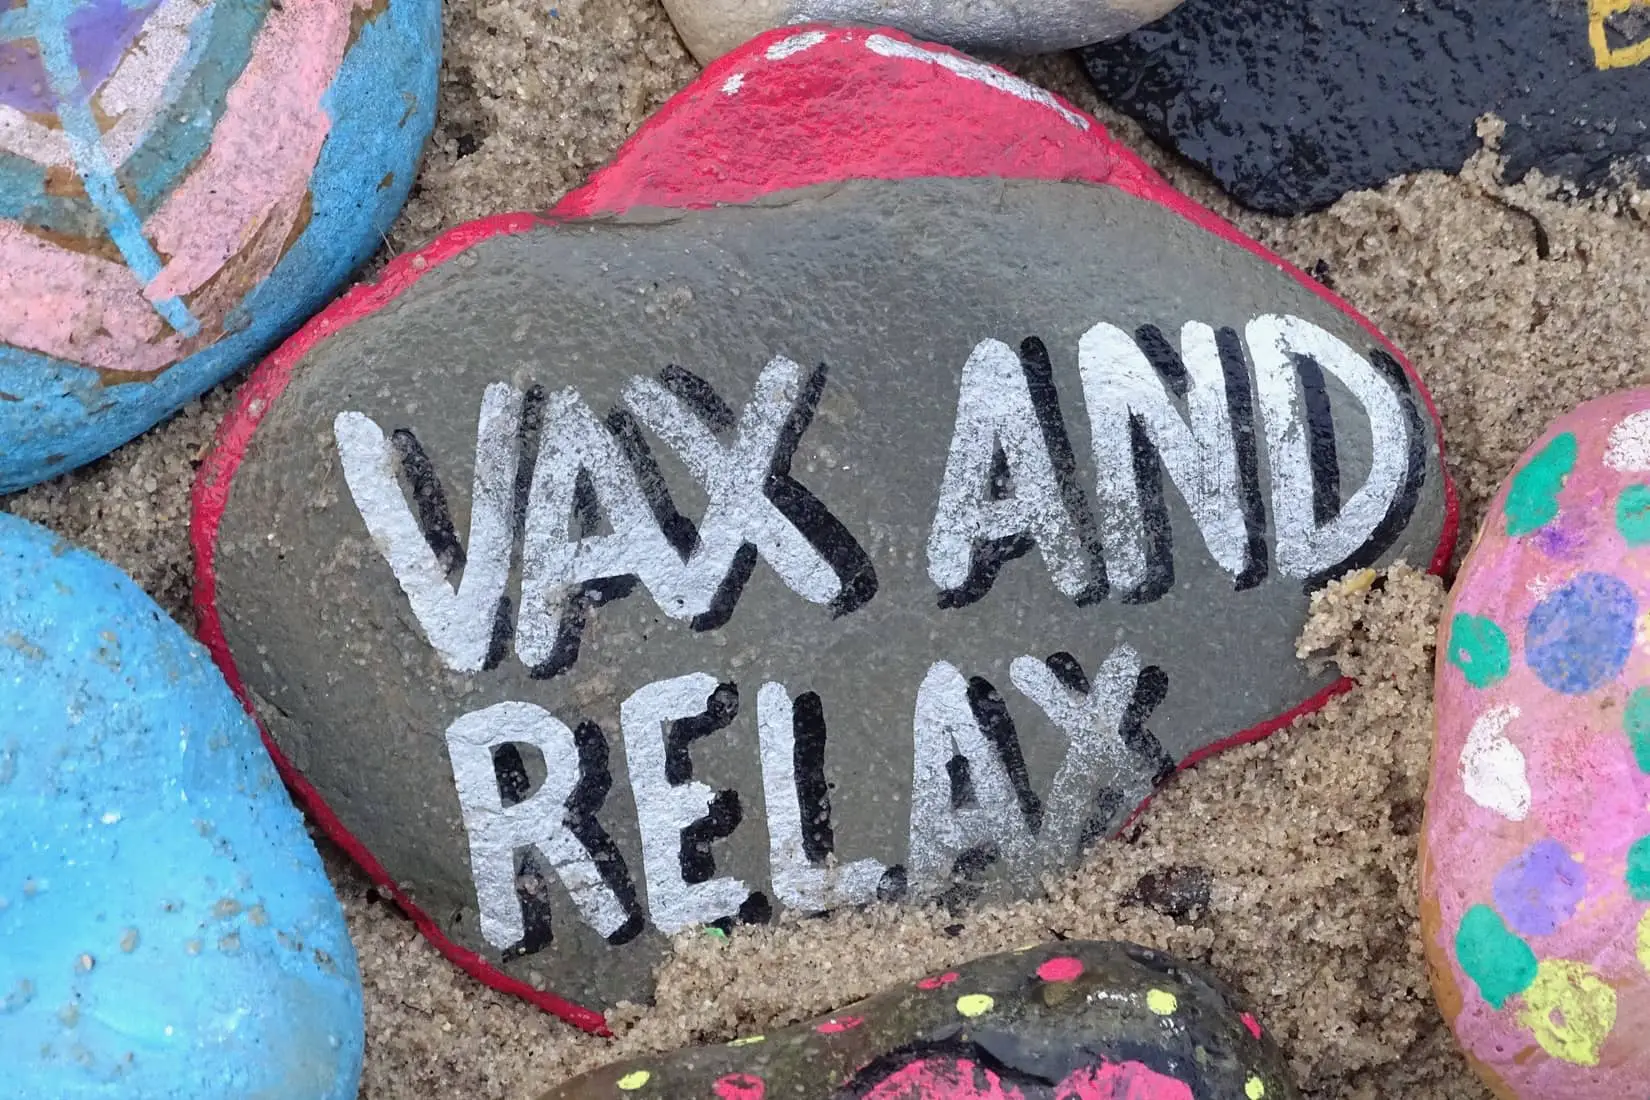 Pebble with vax and relax painted on to it